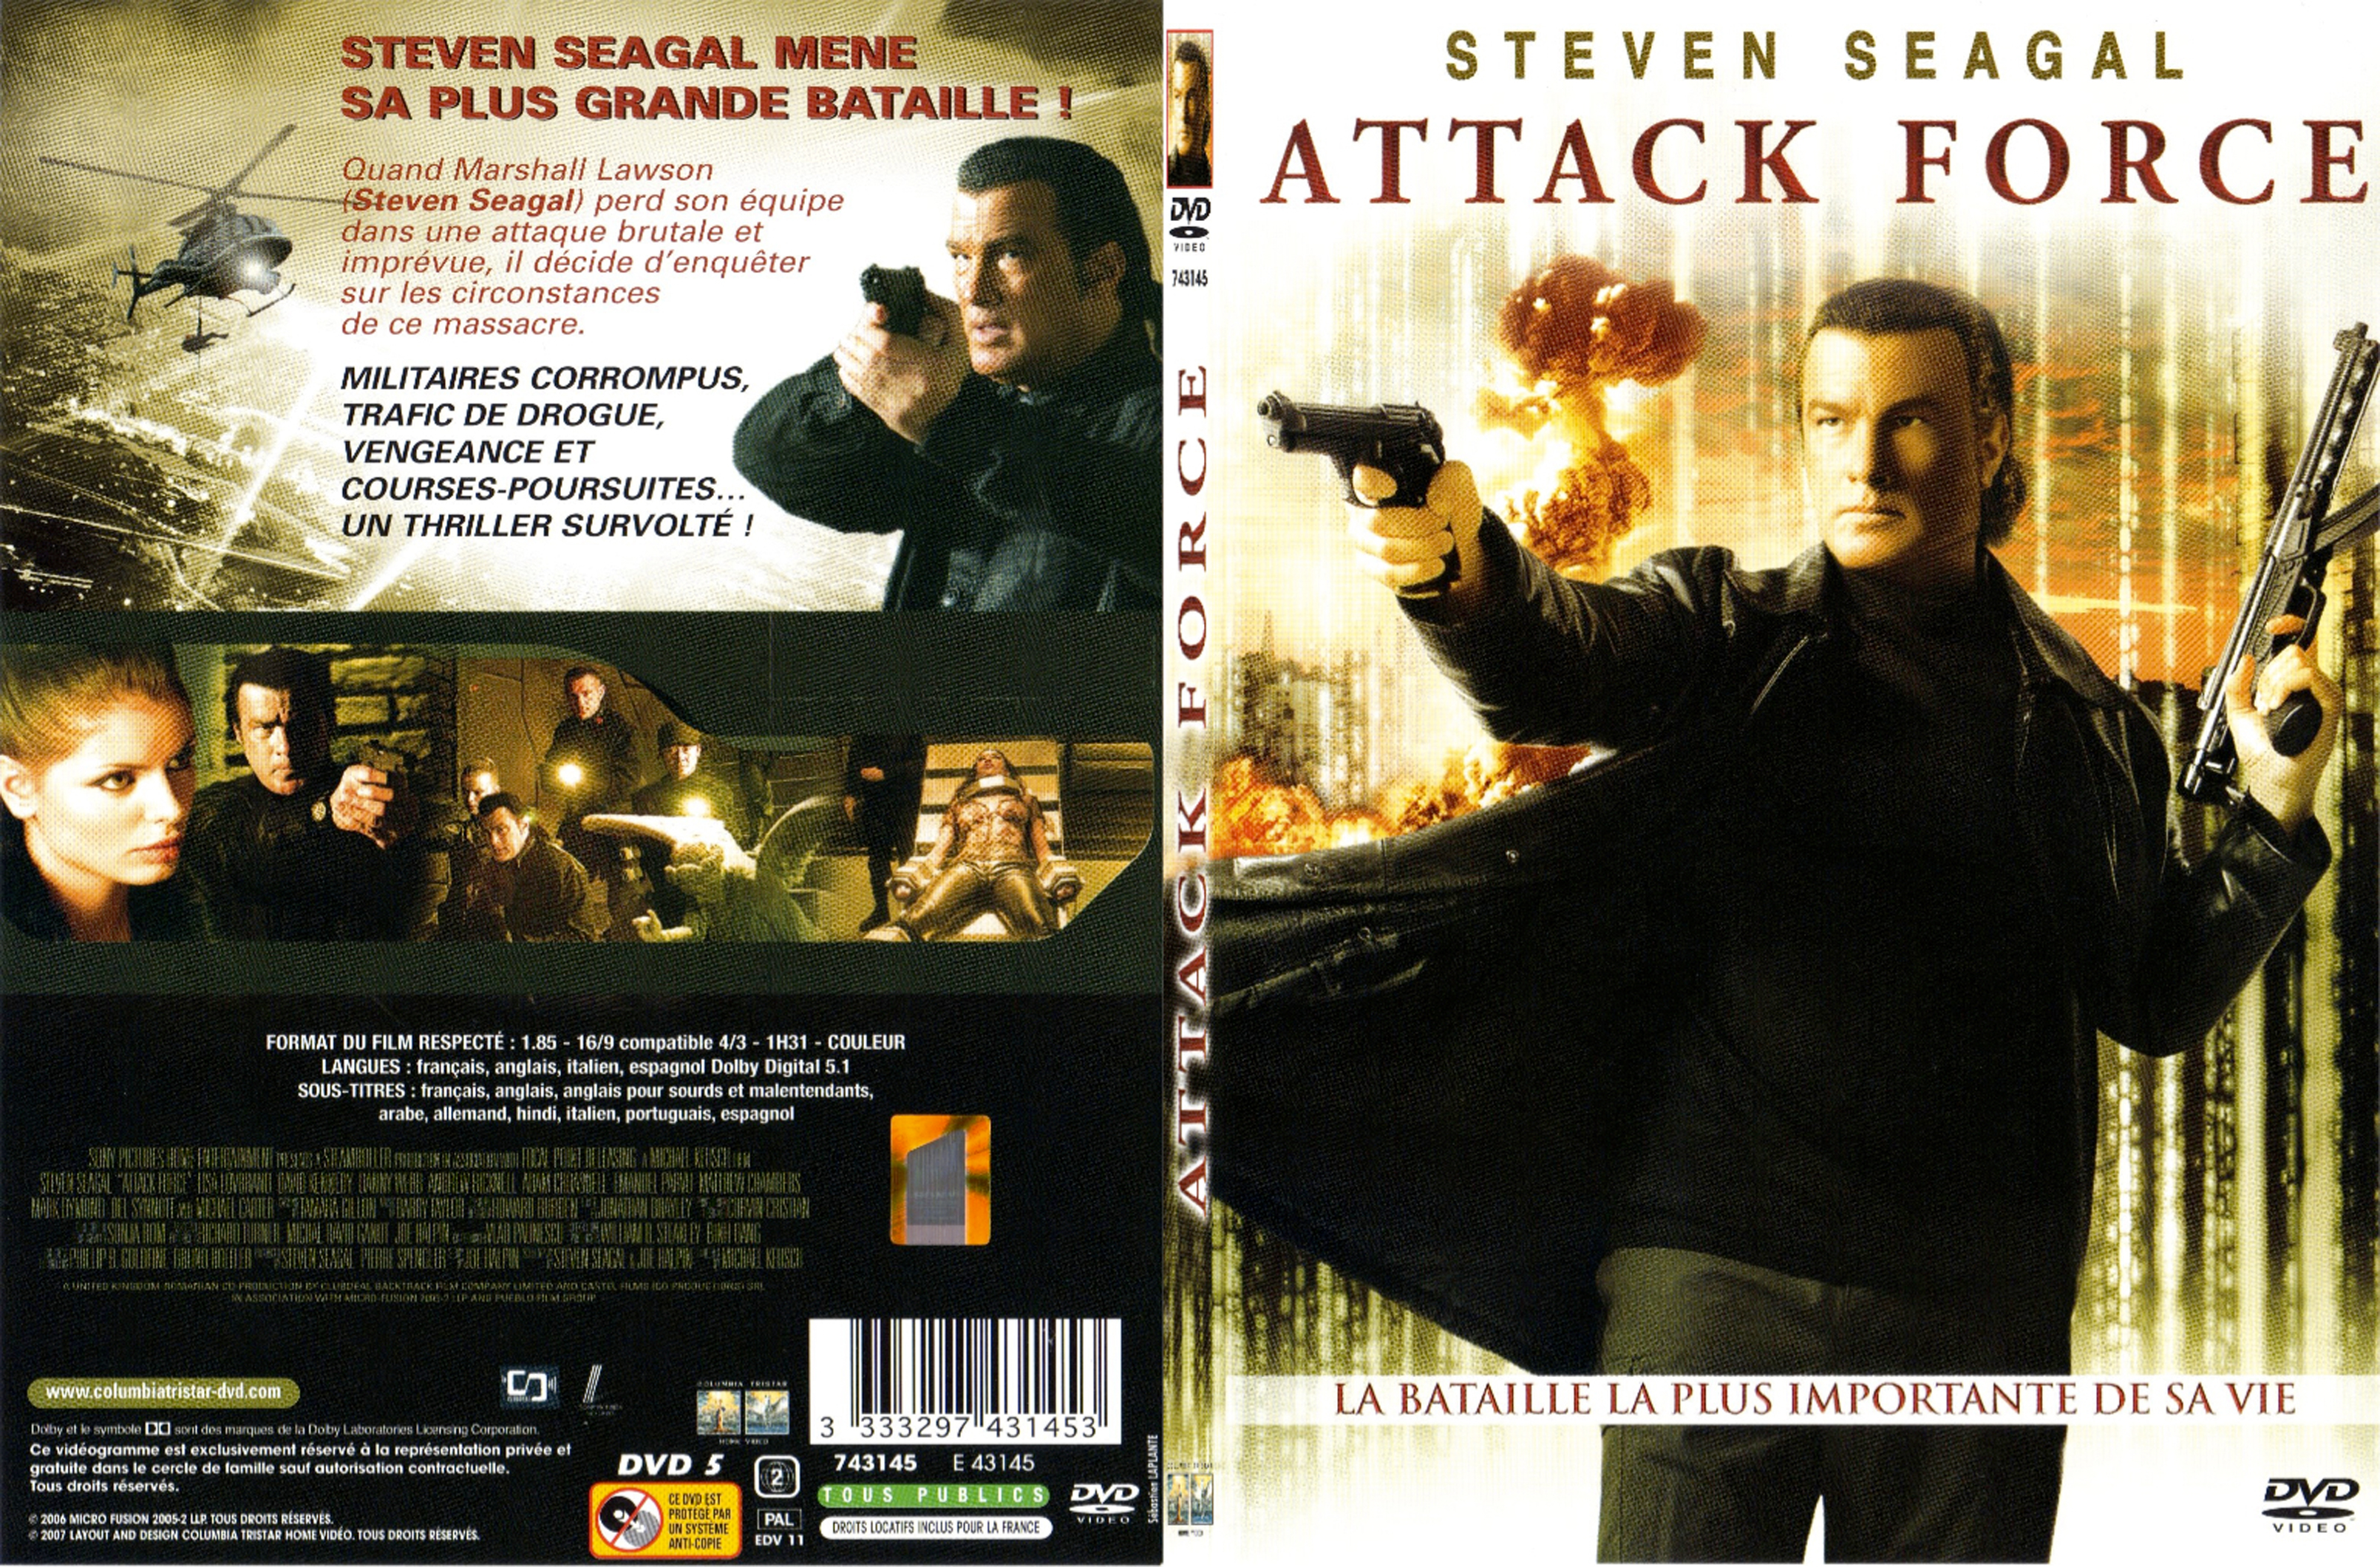 Jaquette DVD Attack force - SLIM